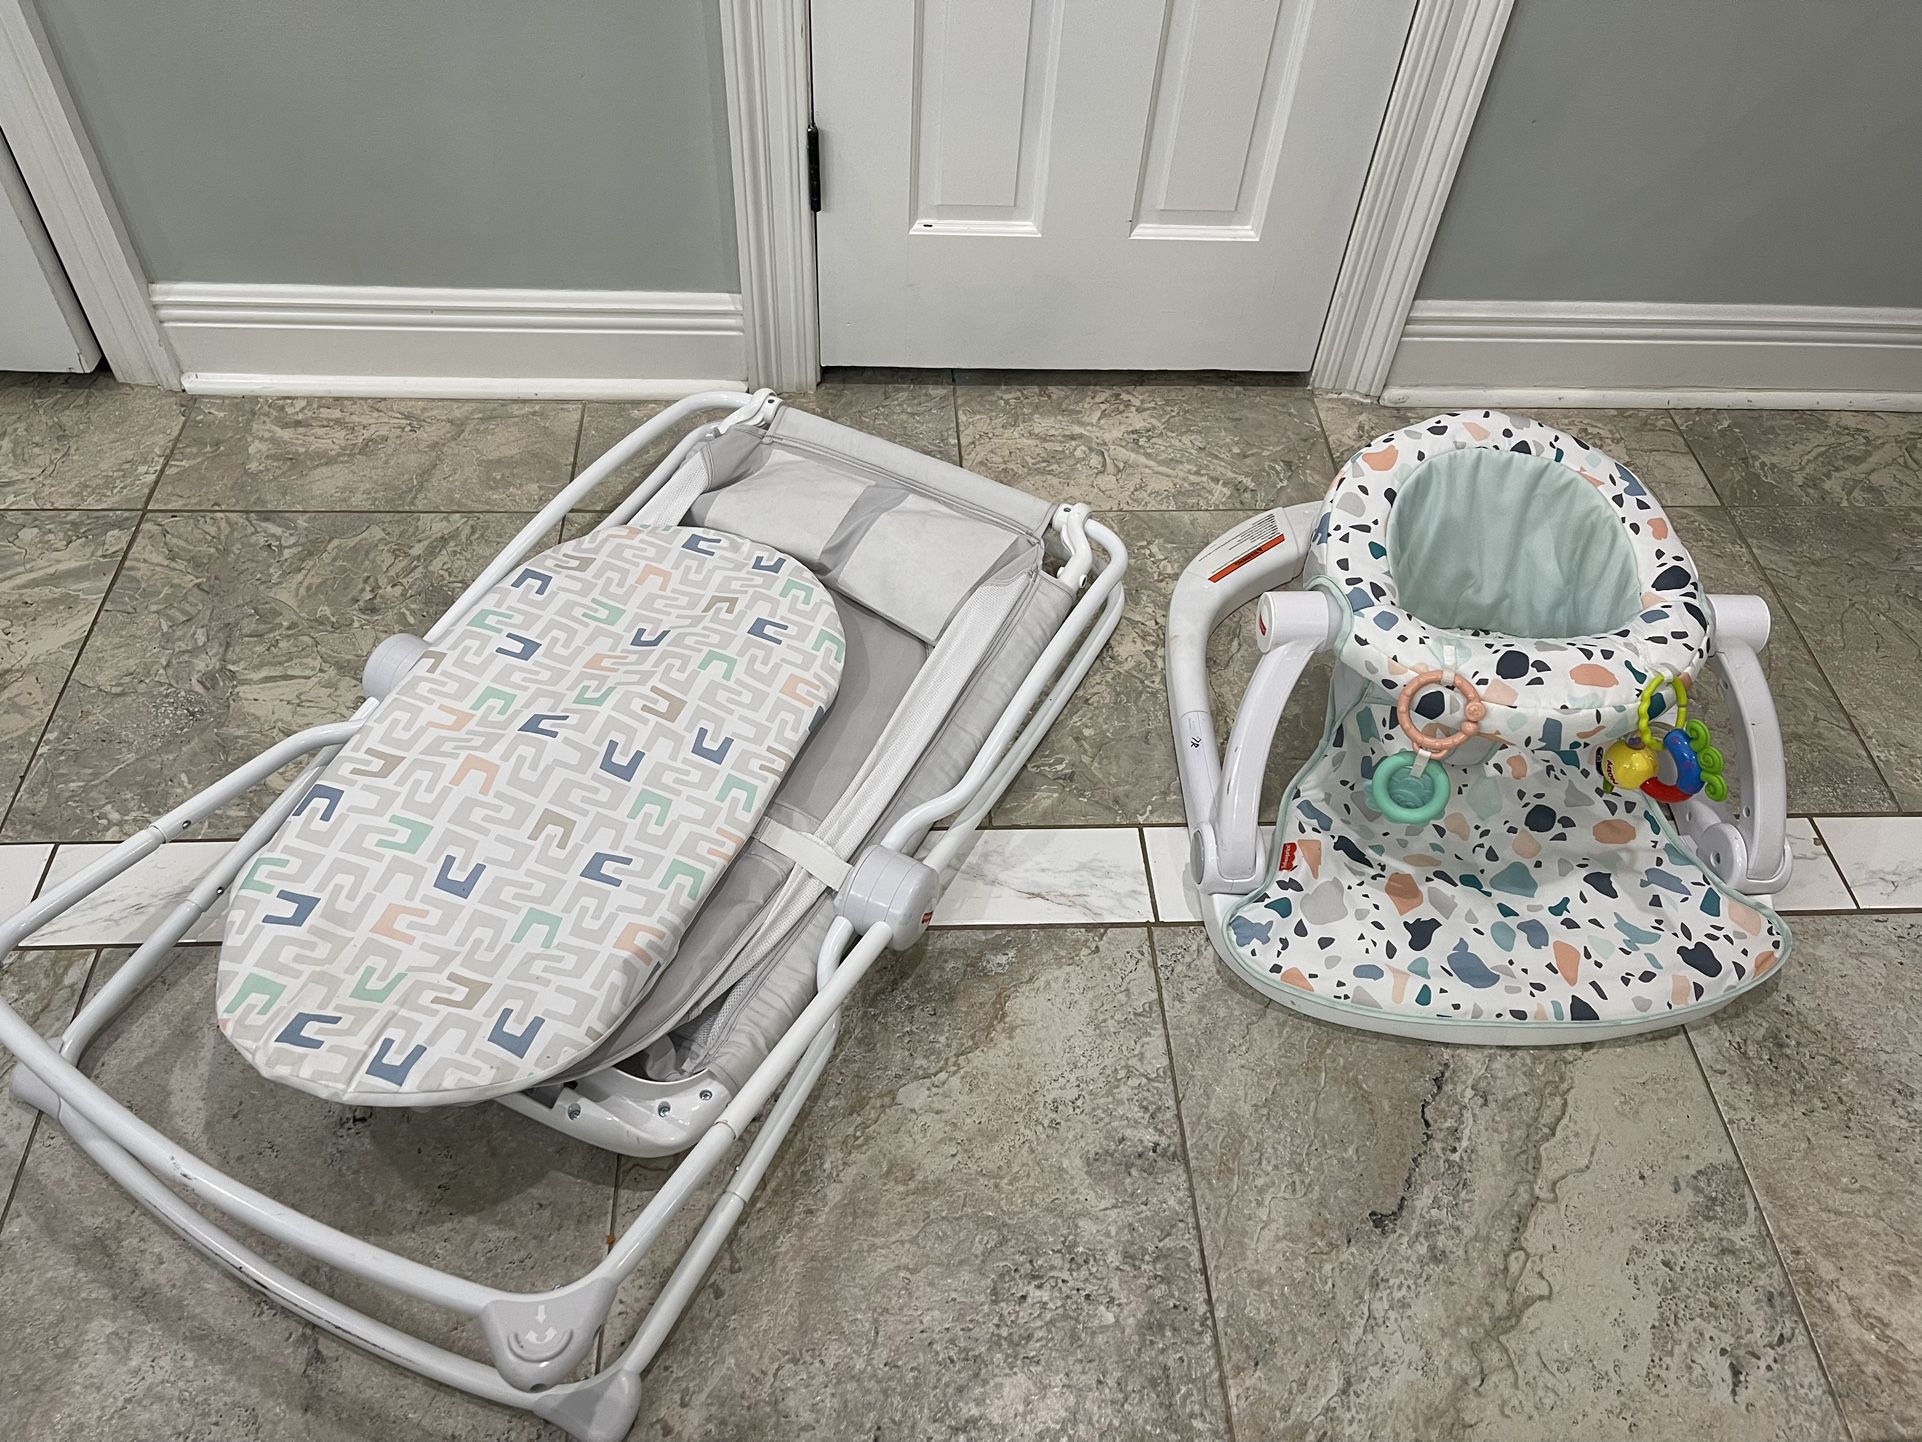 Fisher price baby item both good condition  c Crib and chair